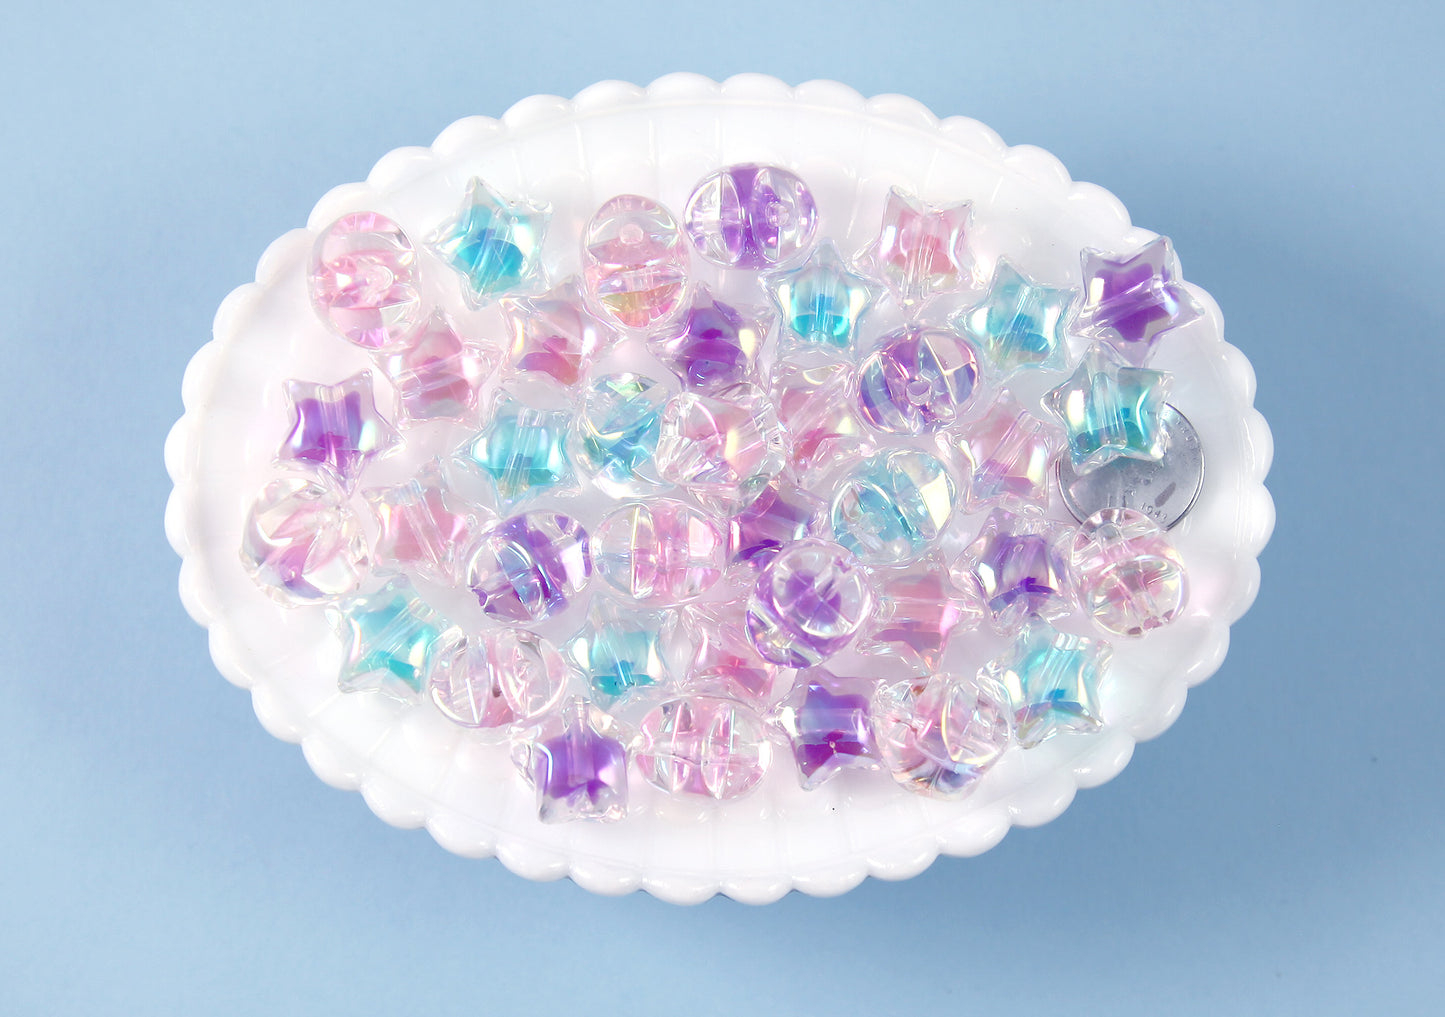 Pastel Star Beads - 15mm Amazing Double Bead Pastel 3D Star Acrylic or Resin Beads - 21 pcs set